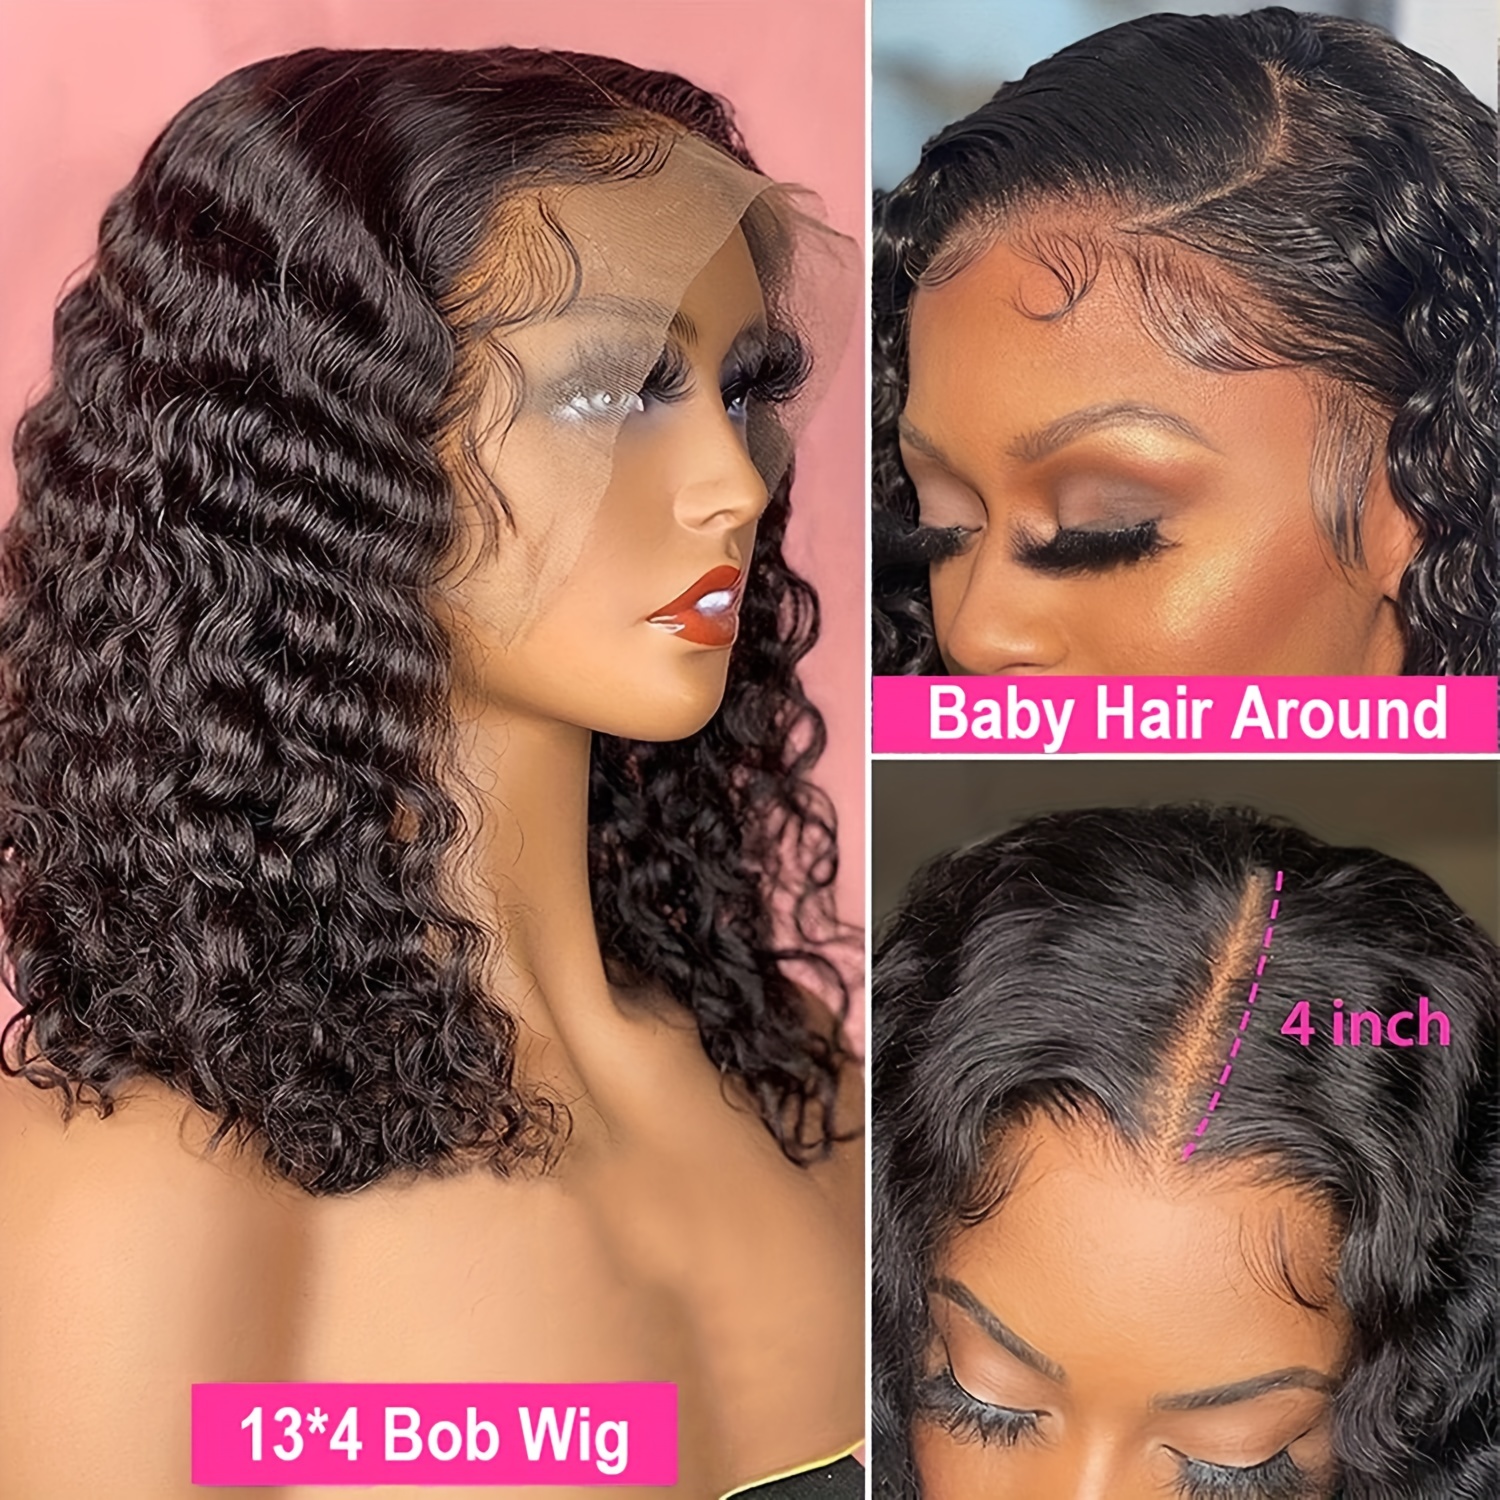 4 Steps To Cut Lace Off Your Wig – Idnhair